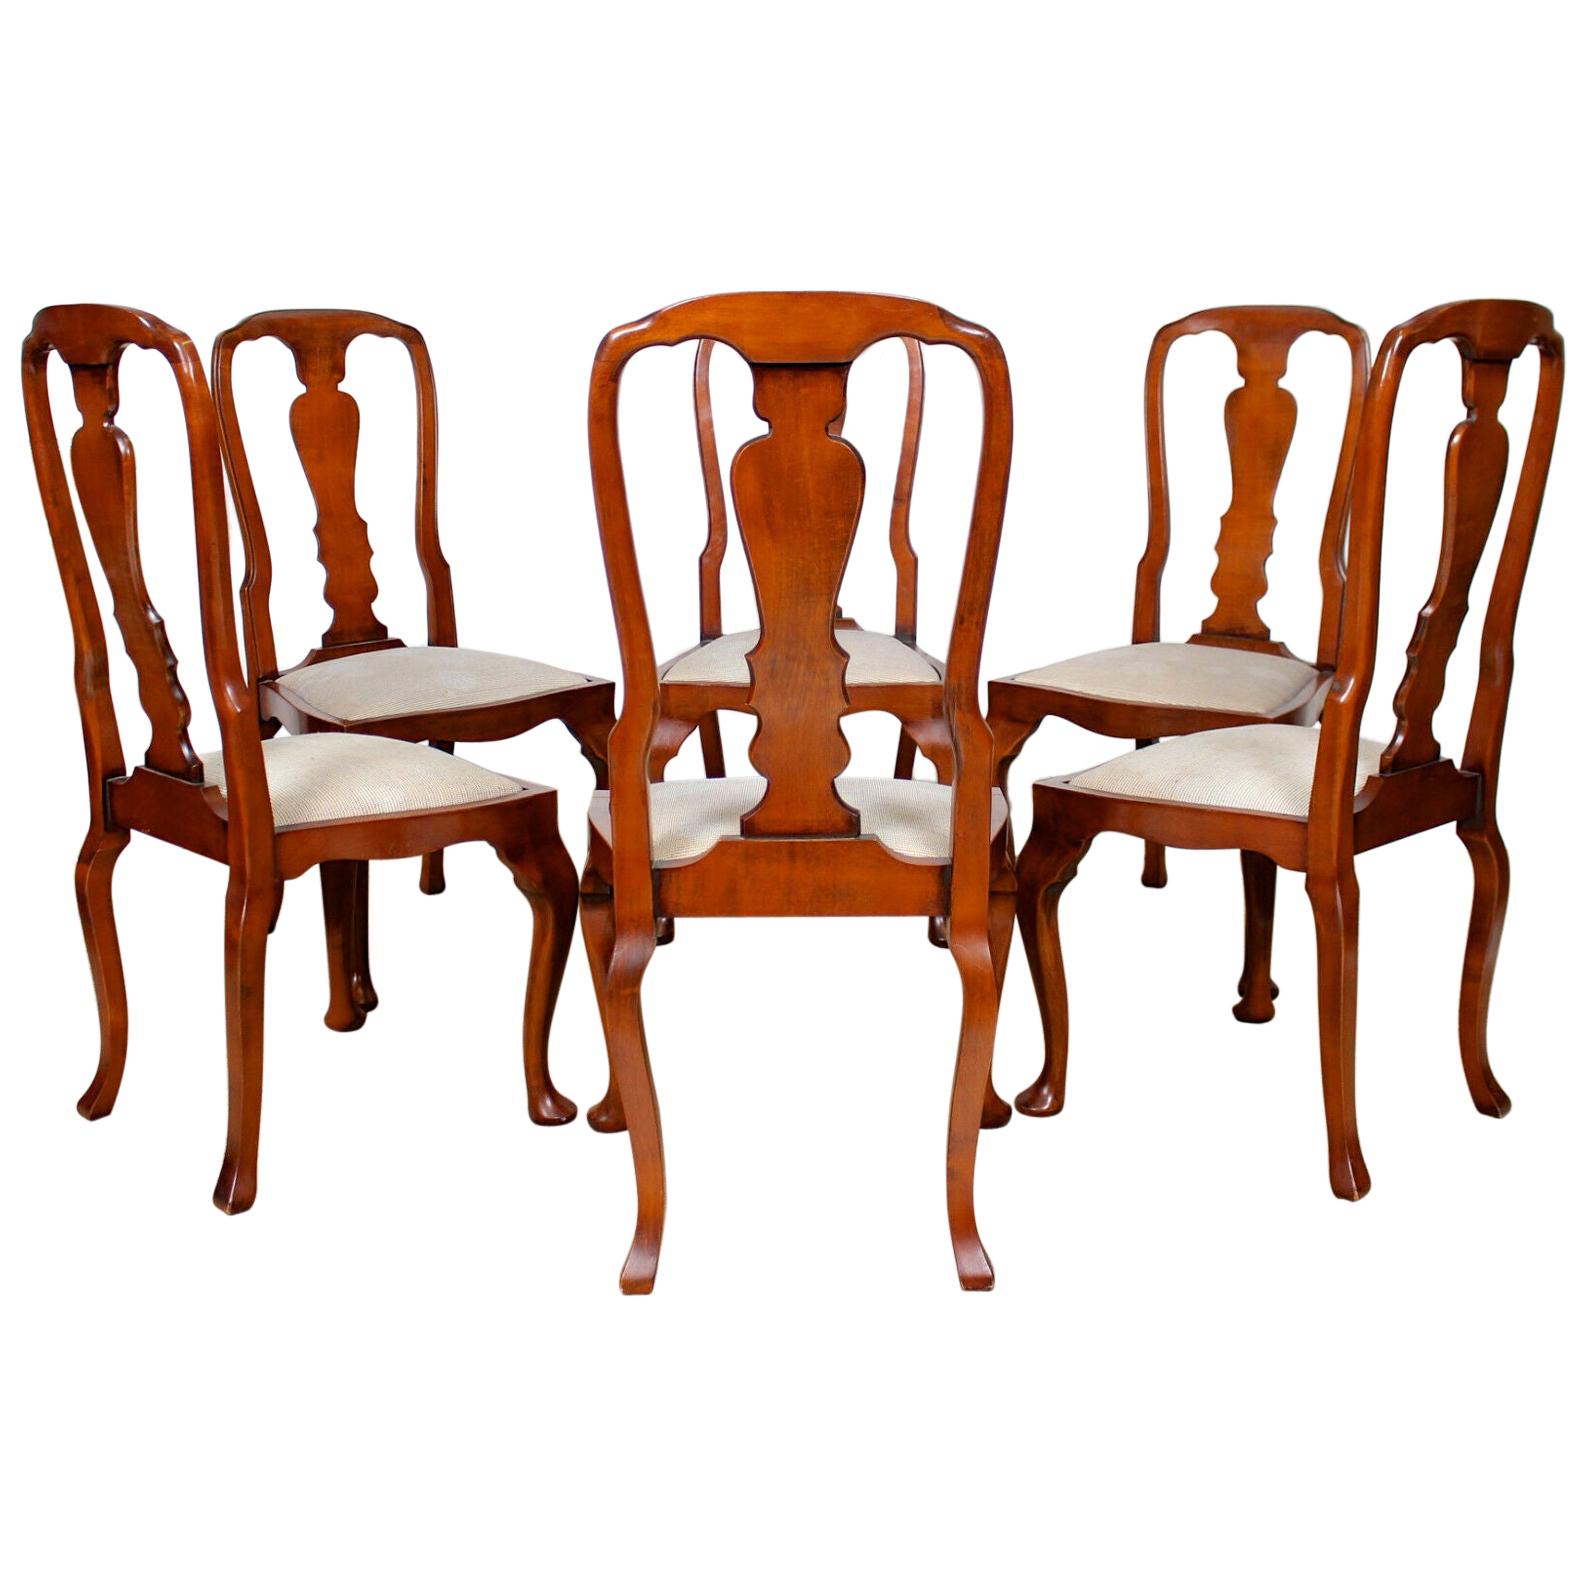 6 English Queen Anne Dining Chairs Antique Vintage